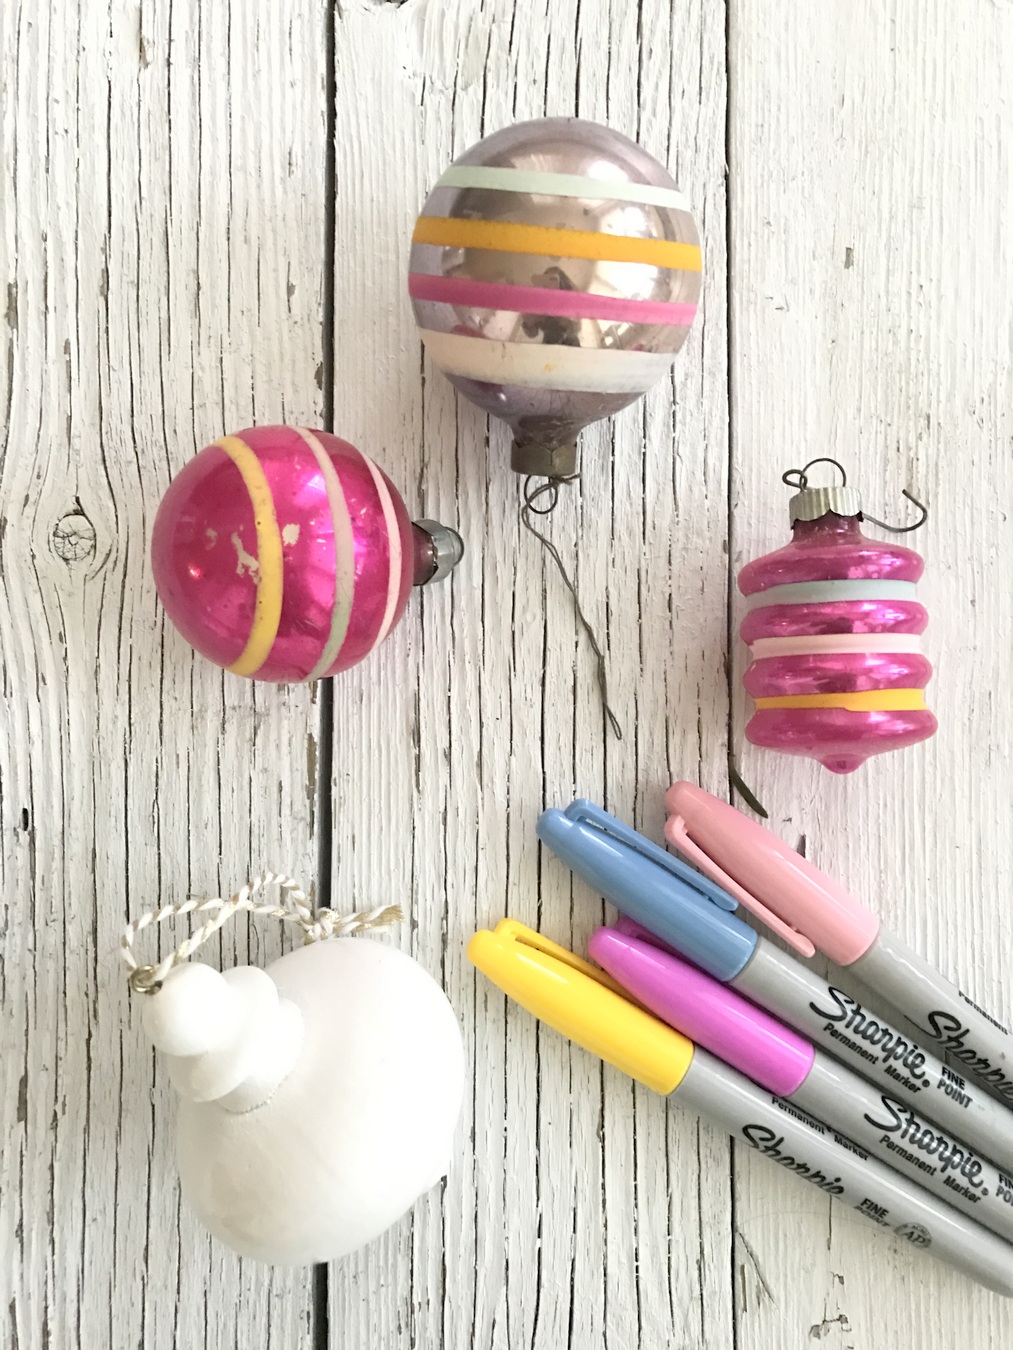 DIY doodle ornaments- the perfect last minute teacher (and neighbor) gifts!